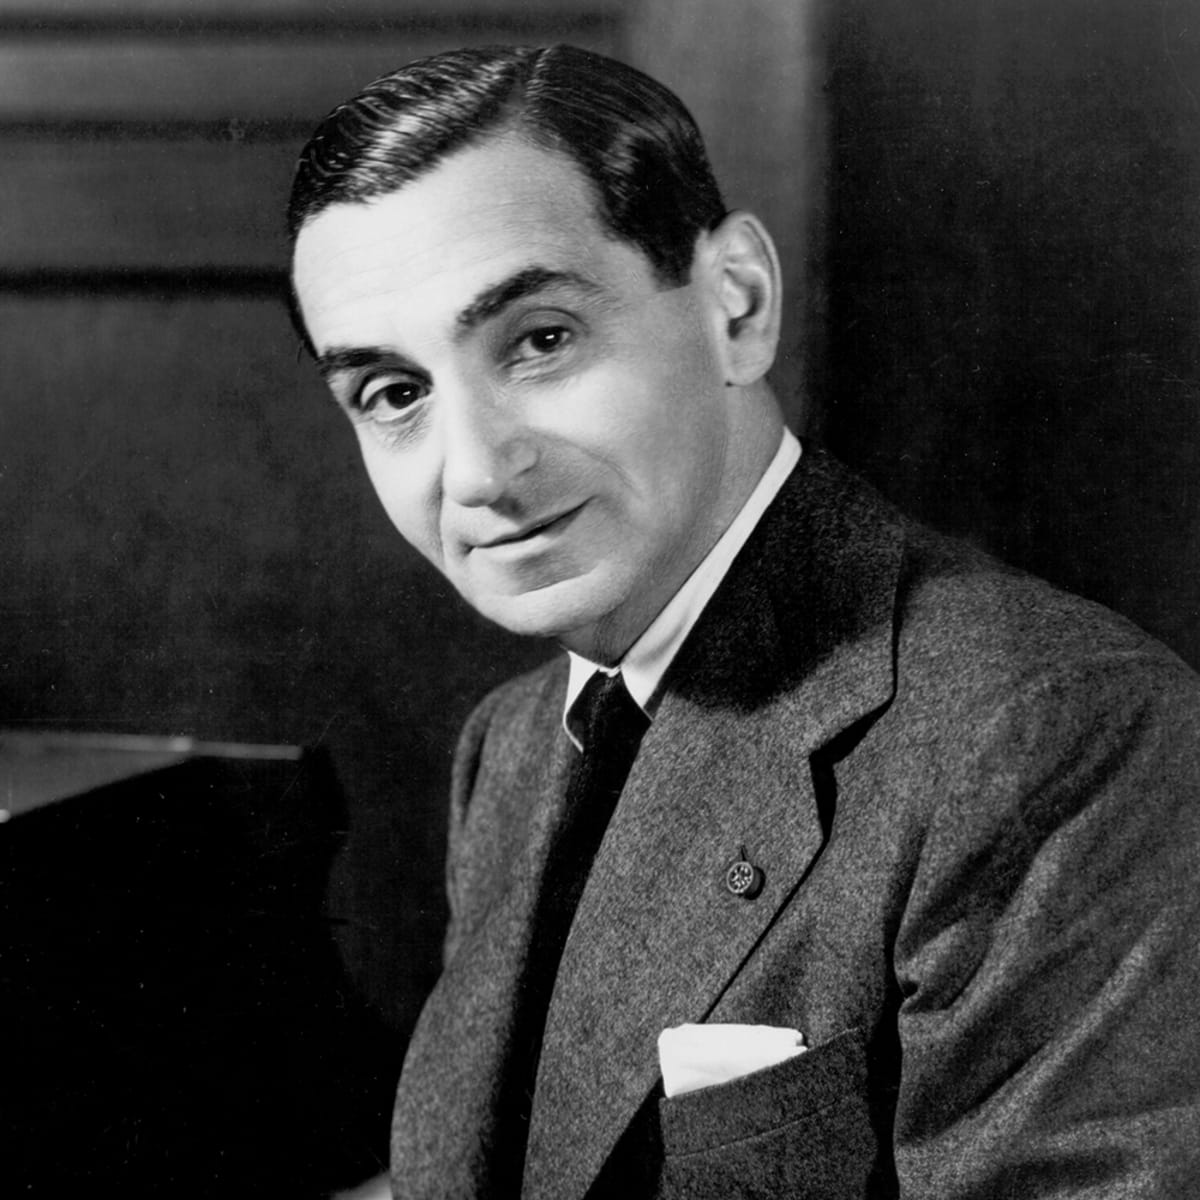 Black and white photo of a man (Irving Berlin) from the chest up,  he has a slicked back hairdo, and is smiling very slightly